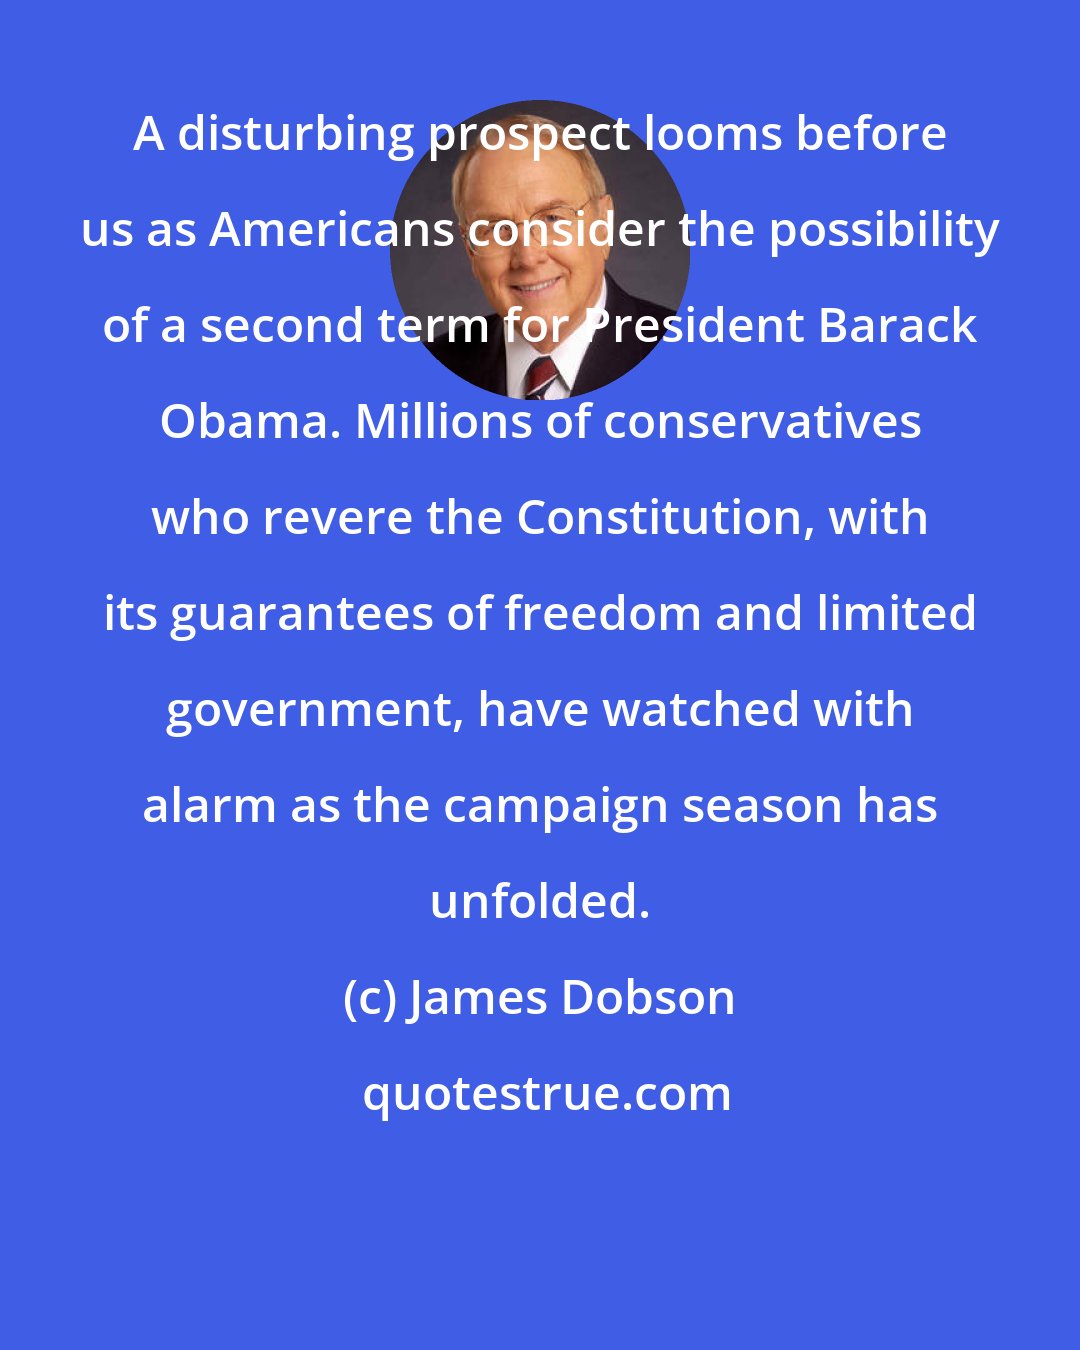 James Dobson: A disturbing prospect looms before us as Americans consider the possibility of a second term for President Barack Obama. Millions of conservatives who revere the Constitution, with its guarantees of freedom and limited government, have watched with alarm as the campaign season has unfolded.